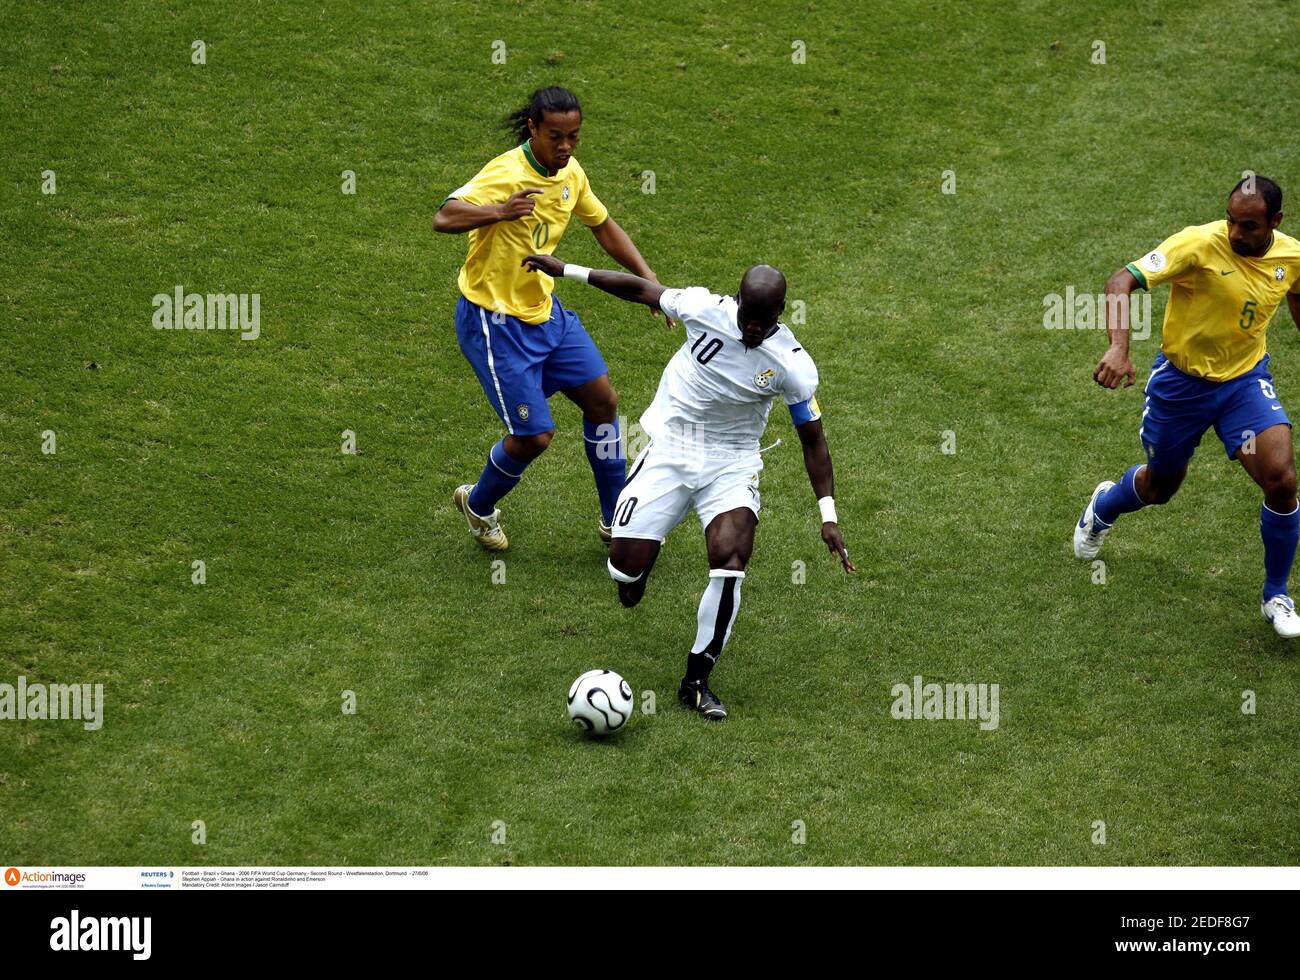 Football - Brazil v Ghana - 2006 FIFA World Cup Germany - Second Round - Westfalenstadion, Dortmund  - 27/6/06  Stephen Appiah - Ghana in action against Ronaldinho and Emerson   Mandatory Credit: Action Images / Jason Cairnduff Stock Photo